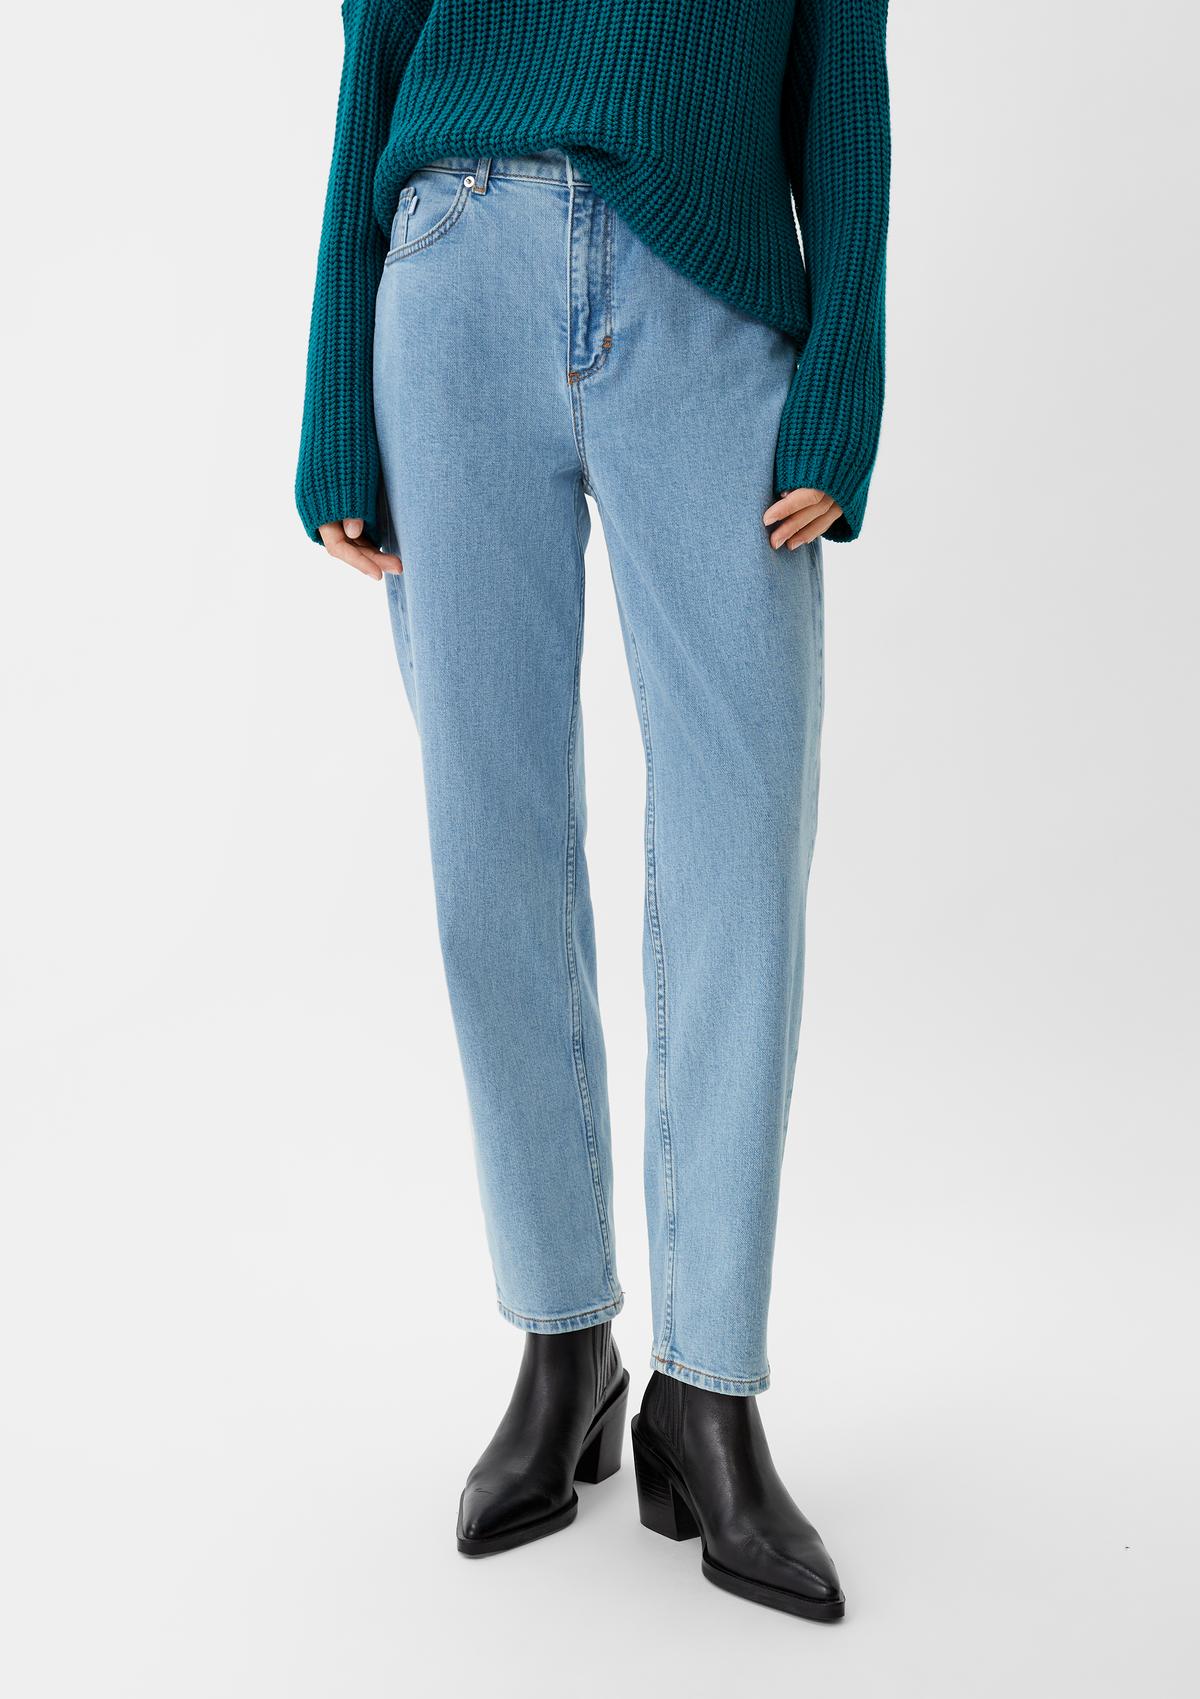 blue fit: Comma | a slim - Mom with jeans leg